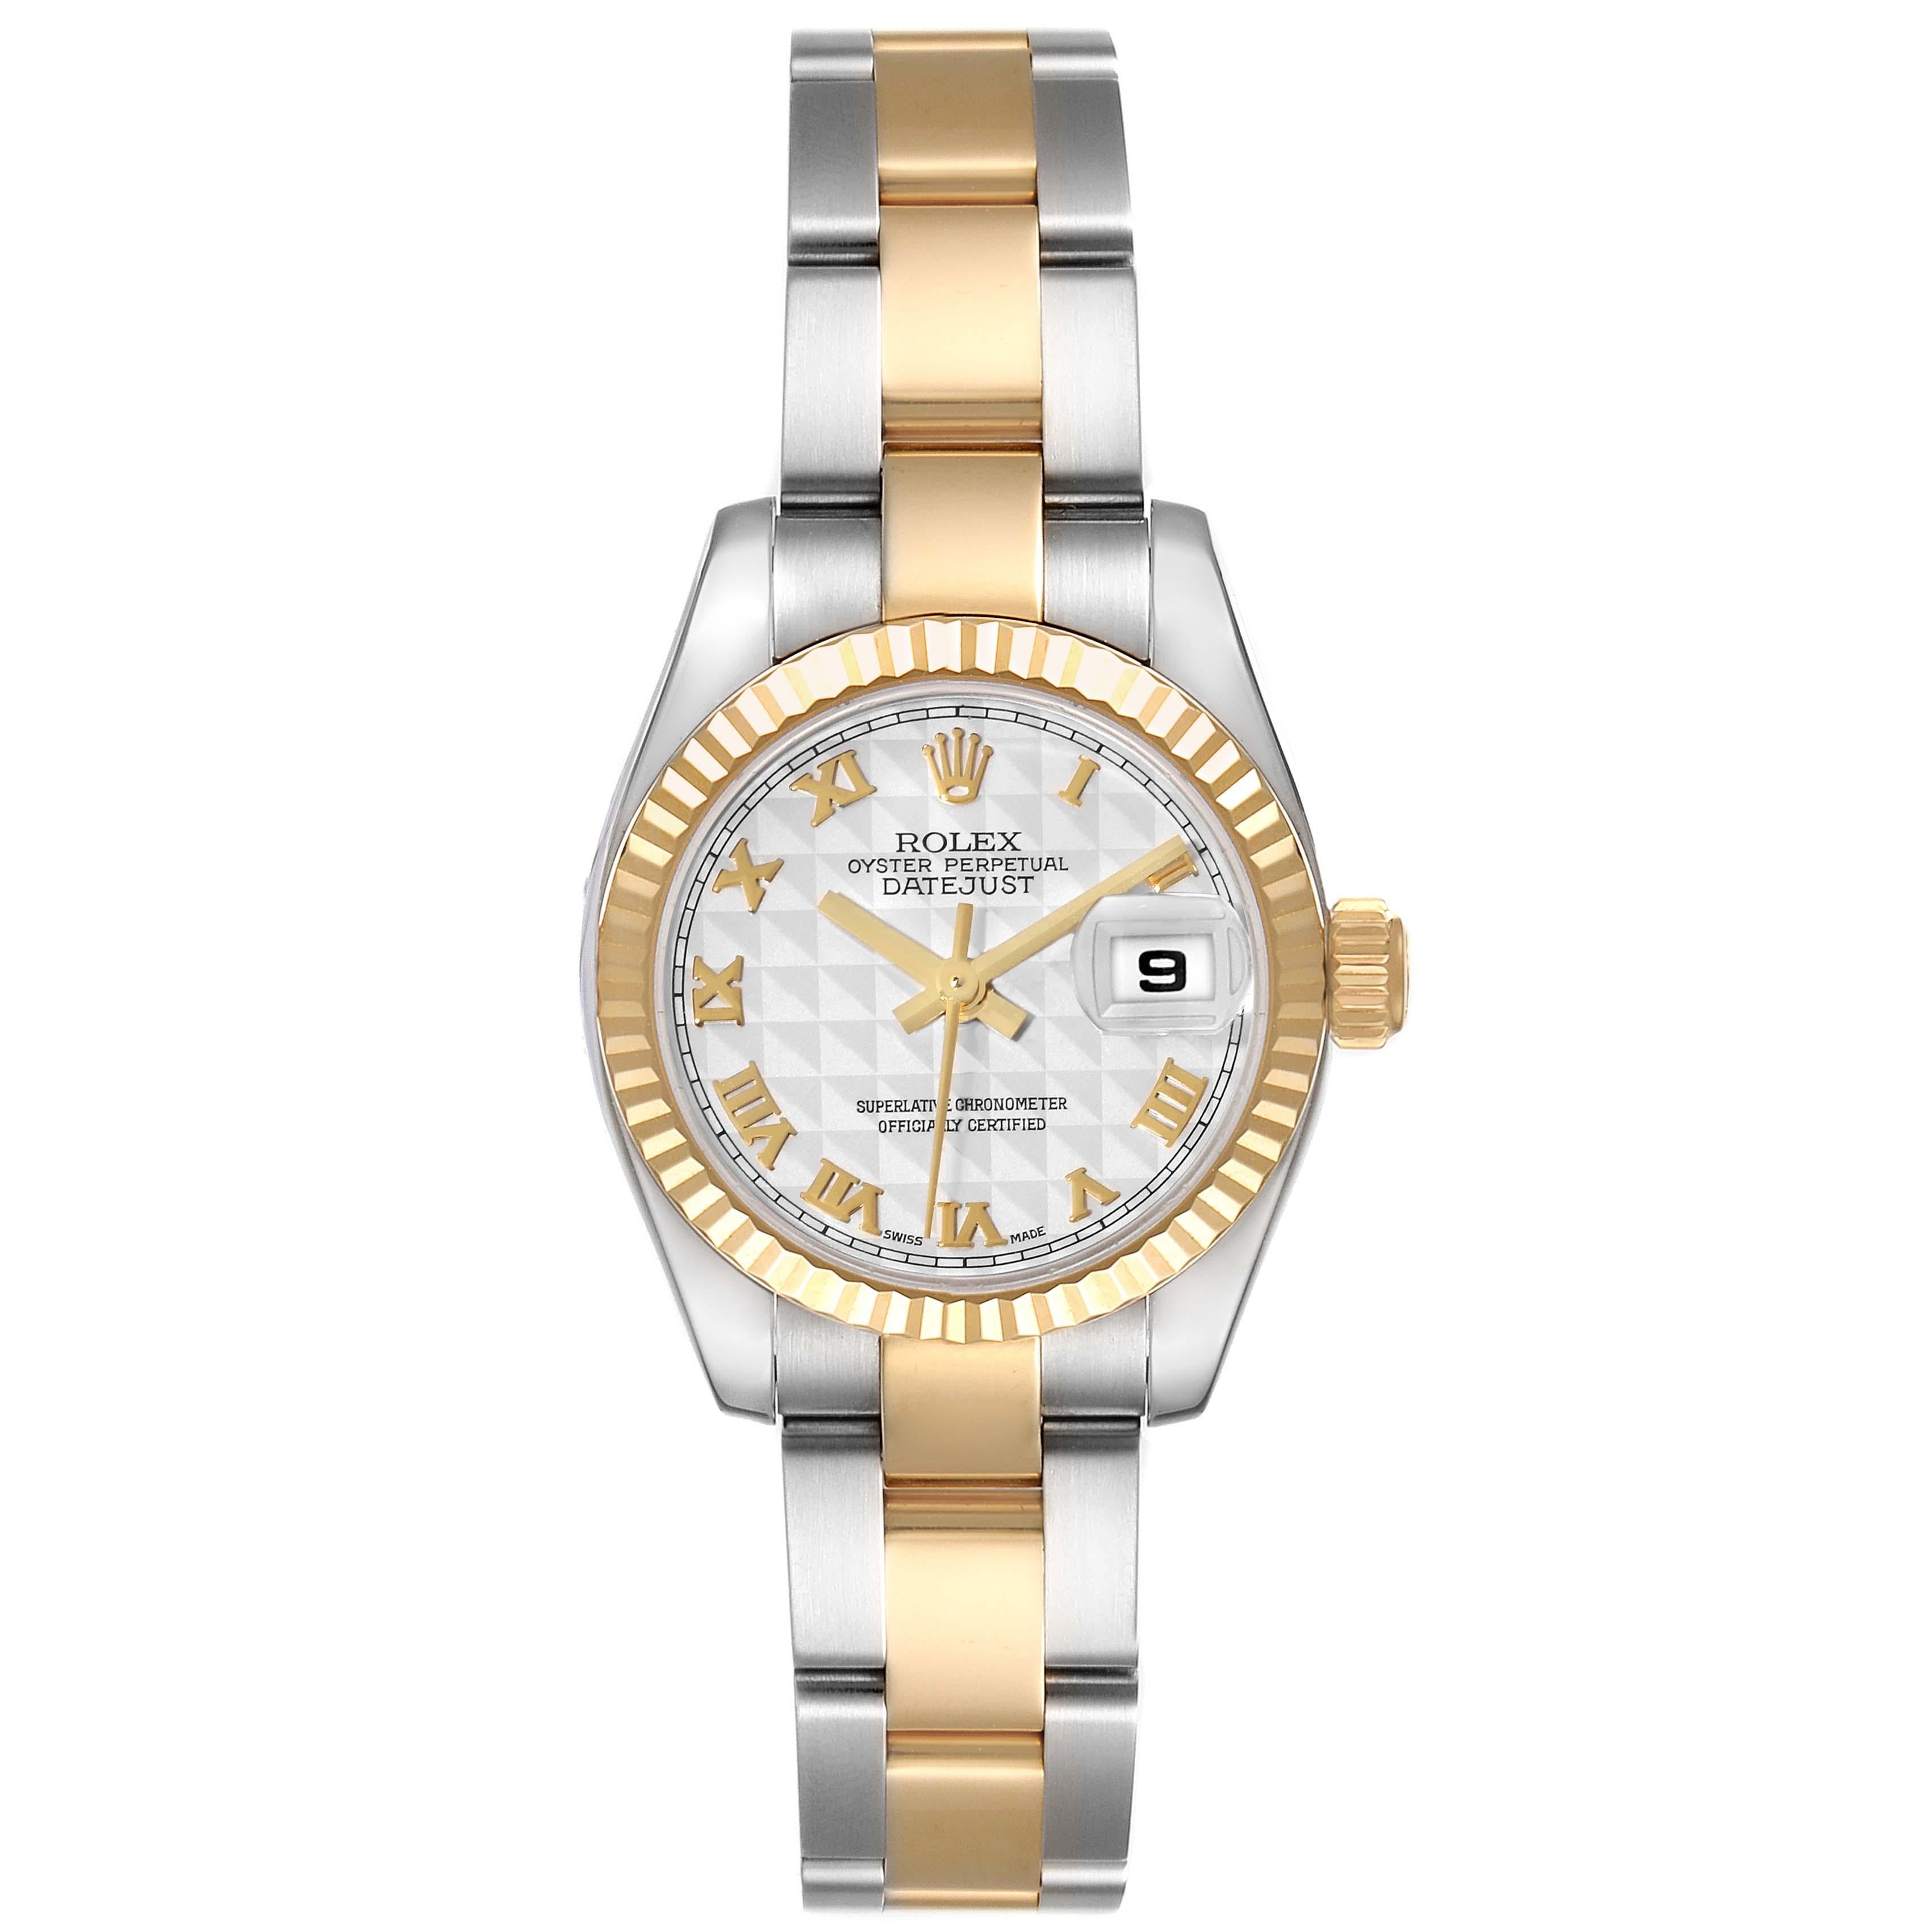 Rolex Datejust Steel Yellow Gold Ivory Pyramid Dial Ladies Watch 179173. Officially certified chronometer automatic self-winding movement. Stainless steel oyster case 26 mm in diameter. Rolex logo on an 18K yellow gold crown. 18k yellow gold fluted